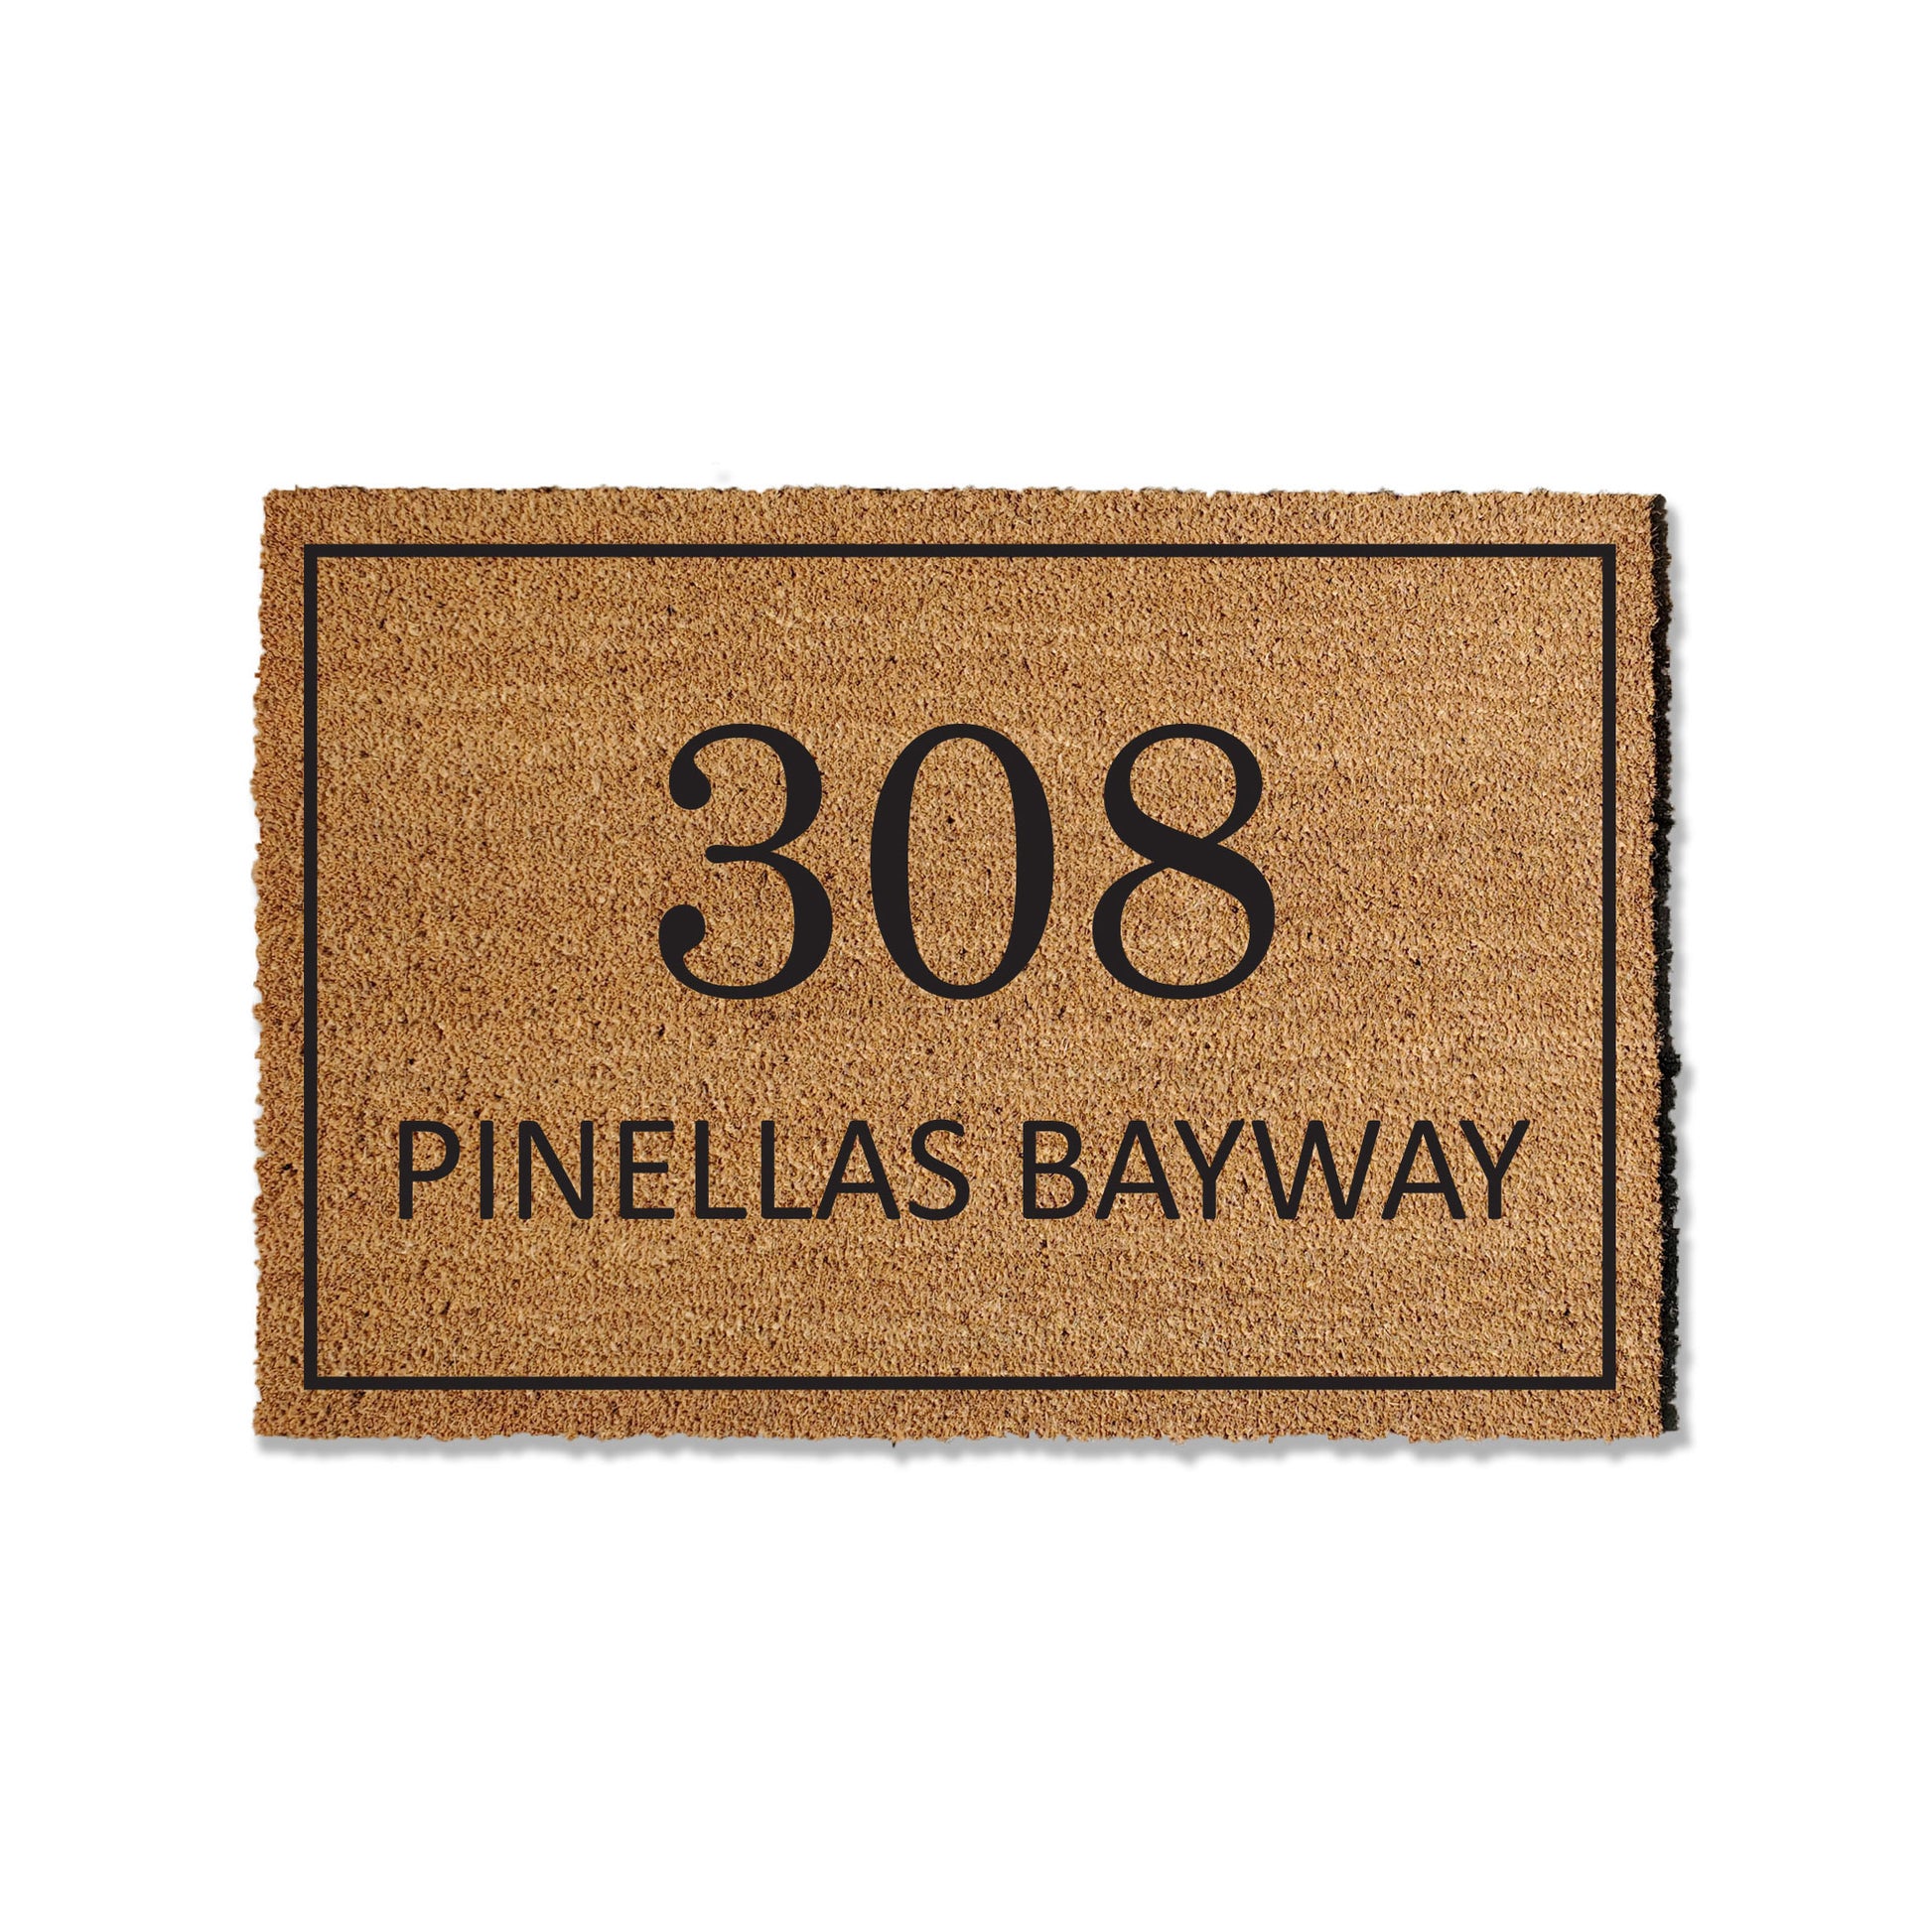 Enhance your entryway with our custom coir doormat, available in multiple sizes and featuring your personalized address. Elevate your home's first impression with this unique touch, or consider it a thoughtful and personalized housewarming gift for loved ones.